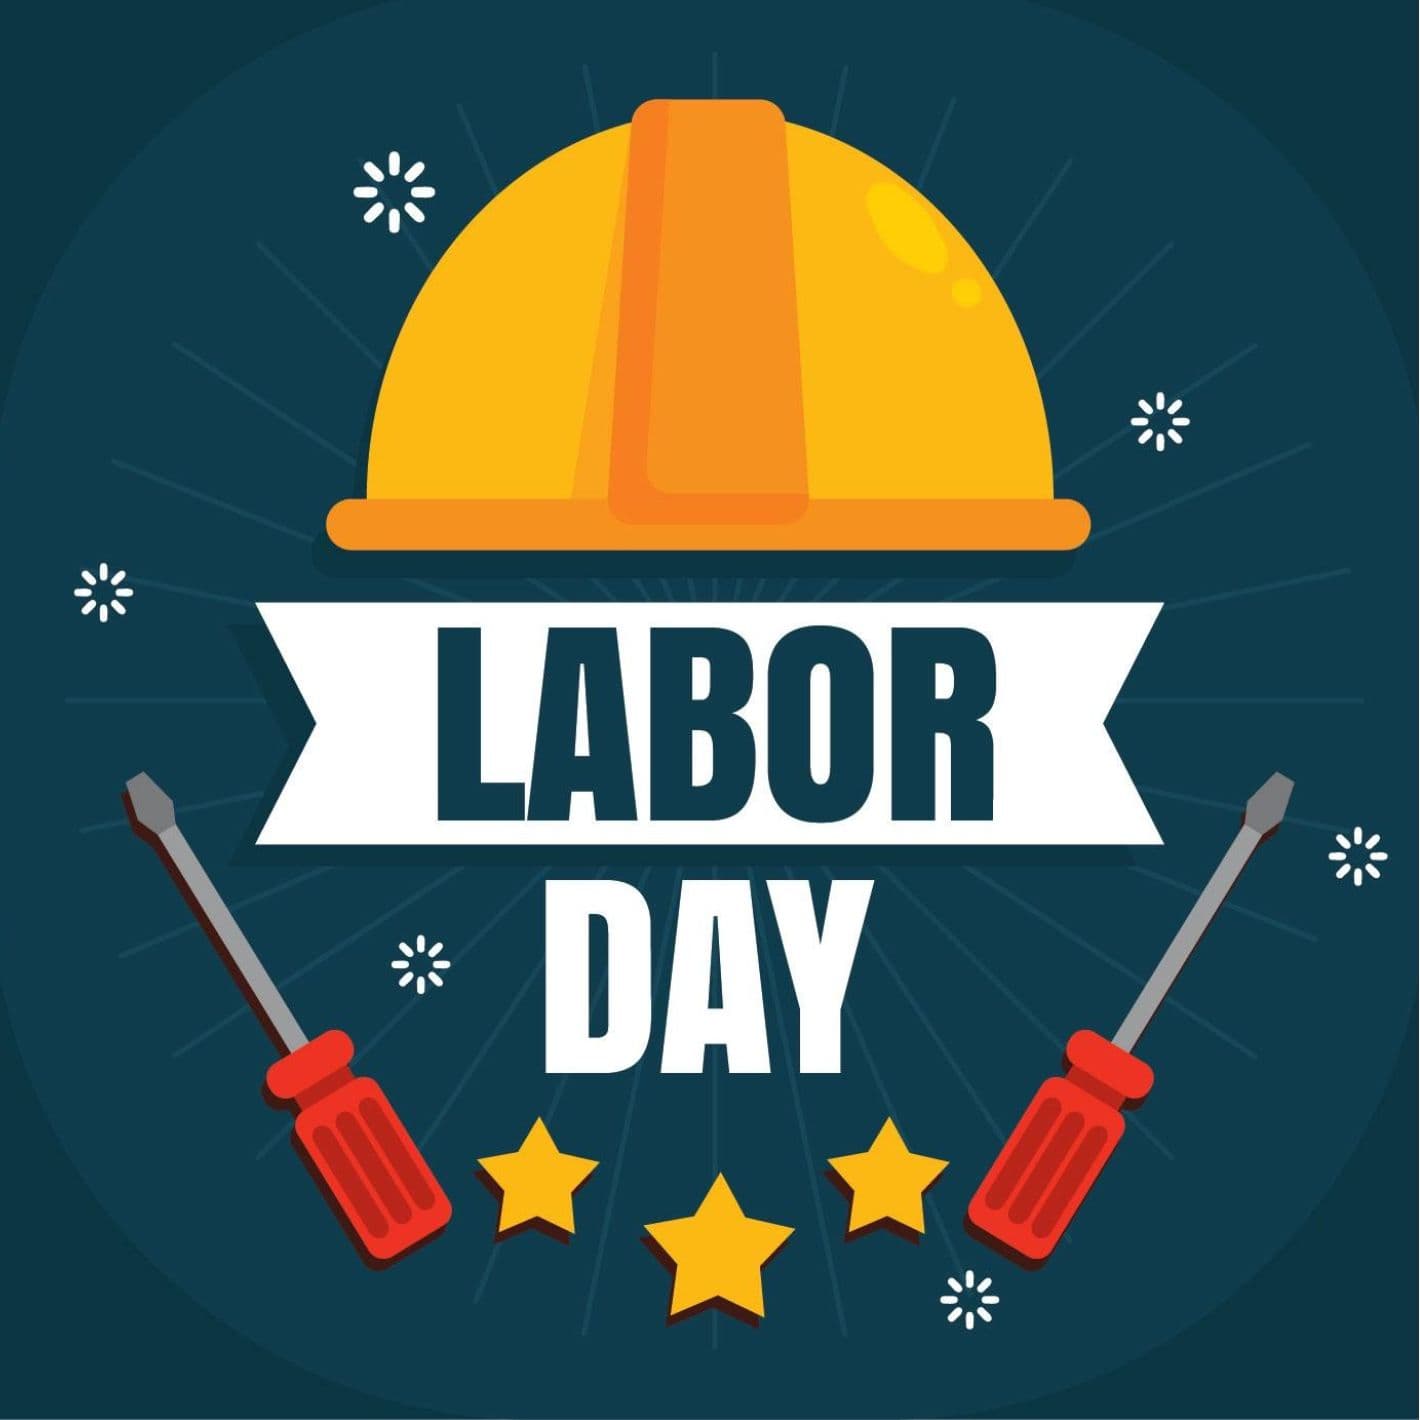 happy labor day images 2022